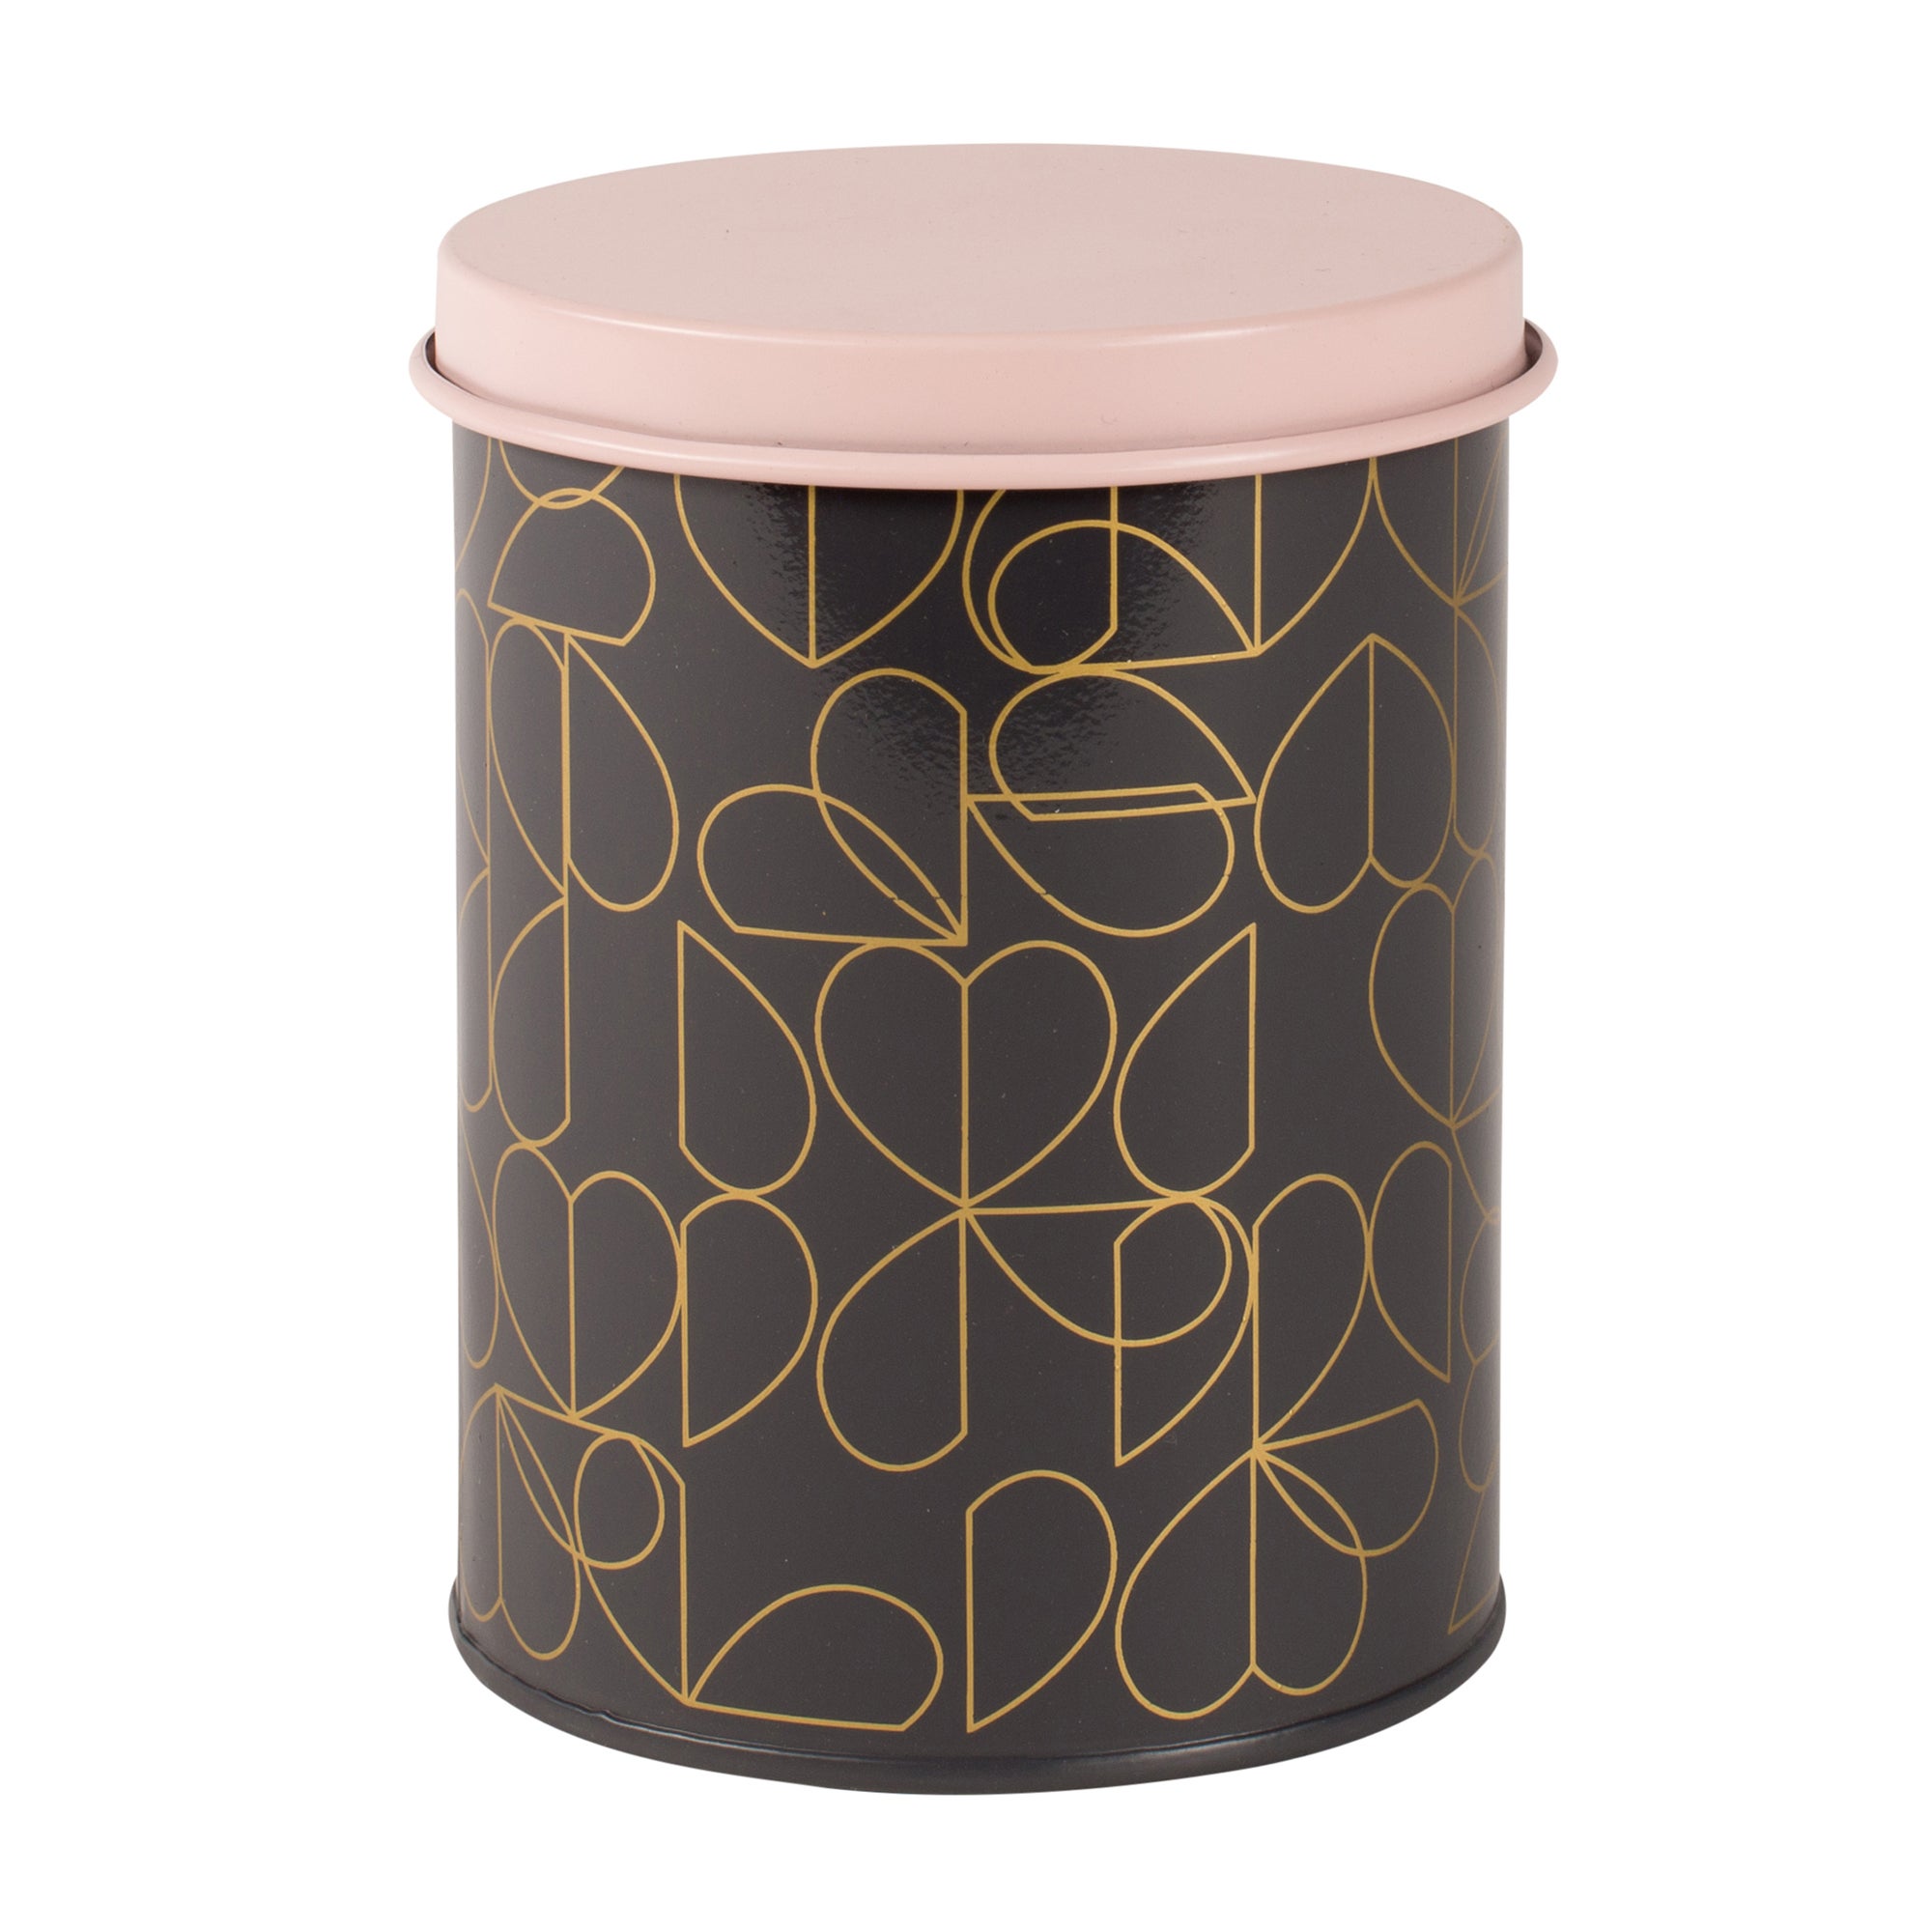 Beau And Elliot Dove Kitchen Canister Pink Black And Gold